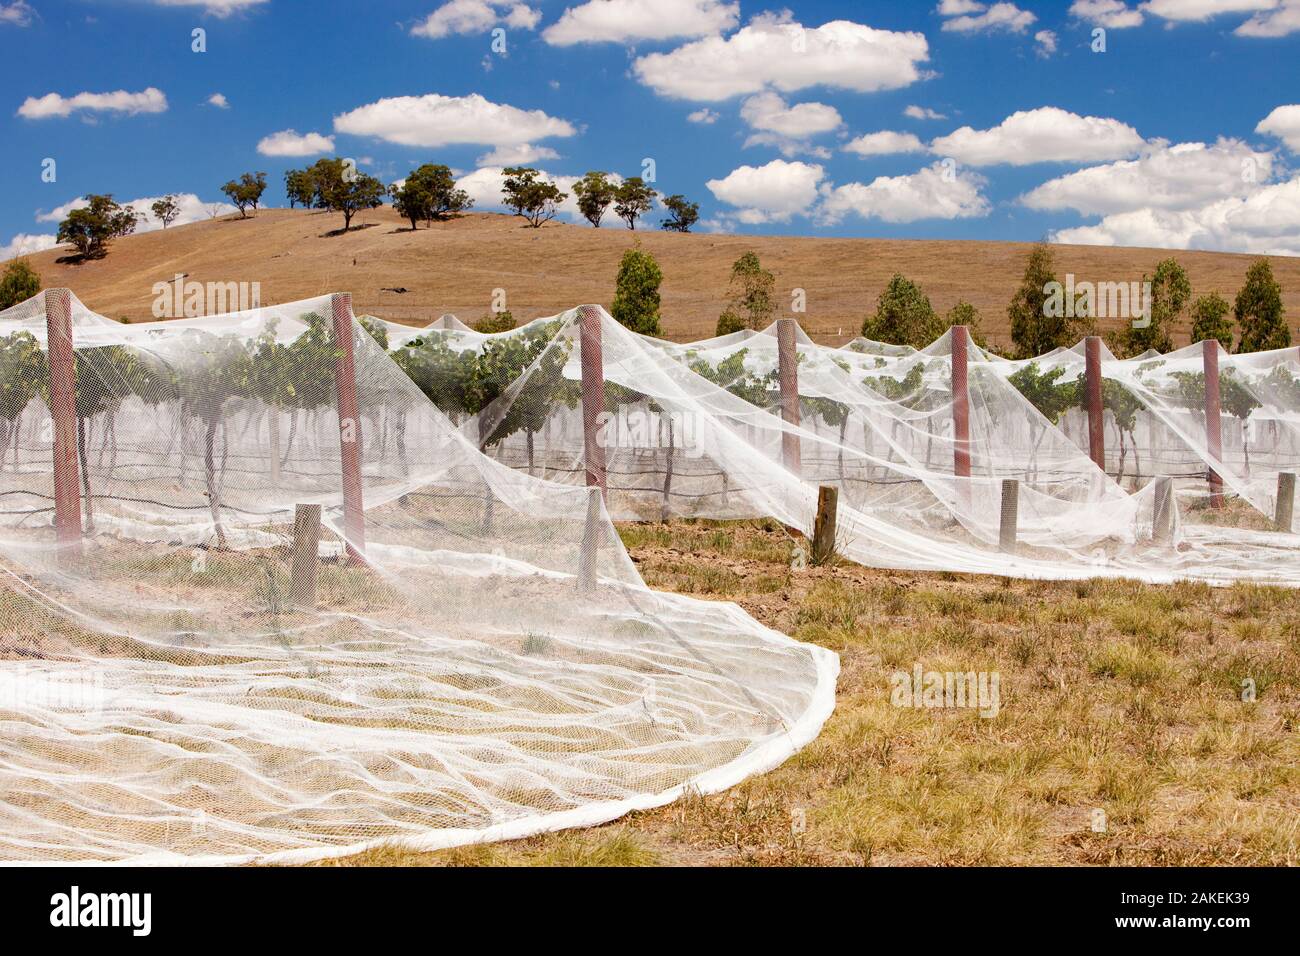 Grape vines near Shepperton, Victoria covered with netting  to protect them from birds. Australia. February 2010. Stock Photo